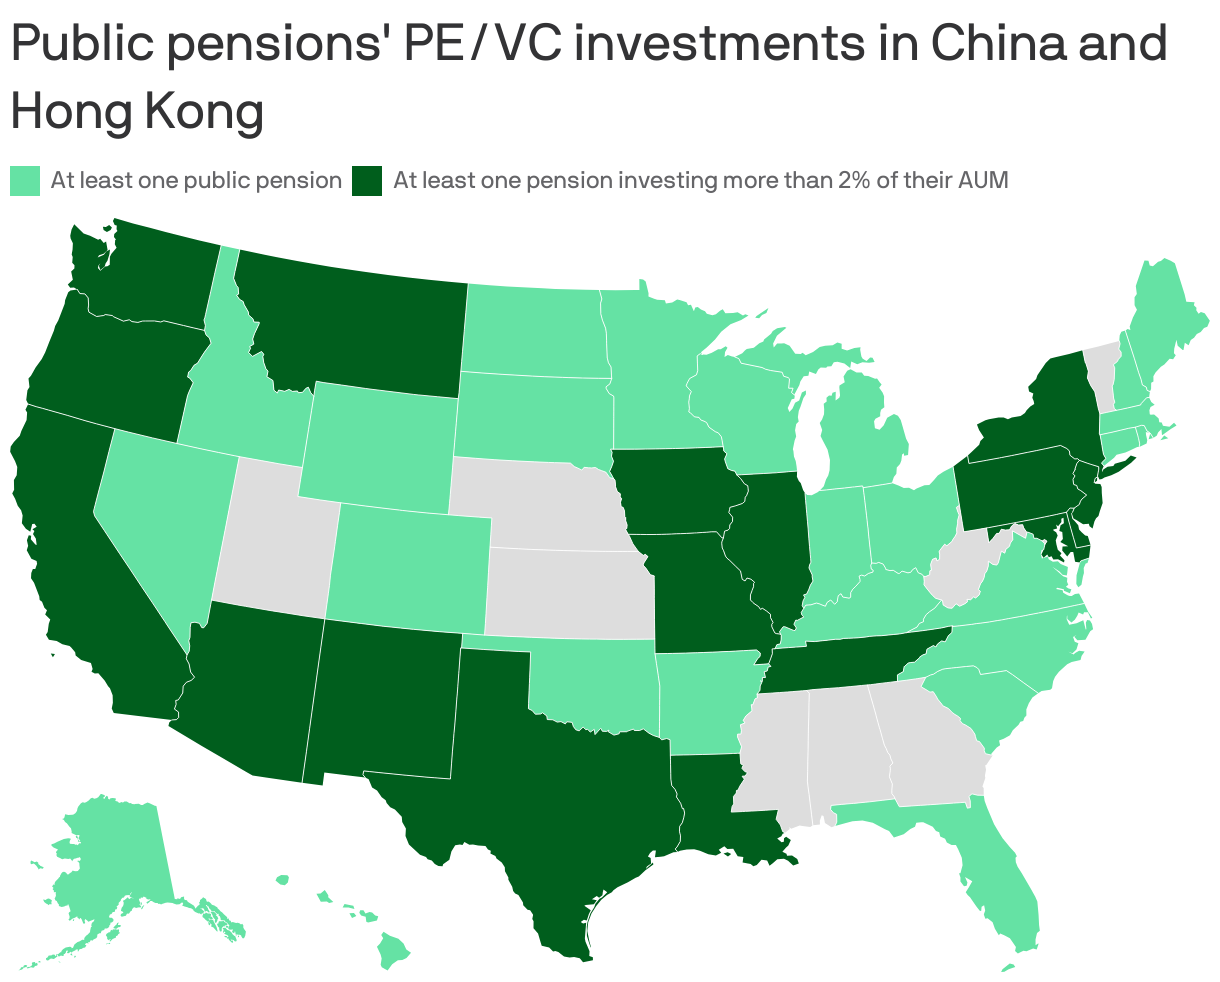 Public pensions' PE/VC investments in China and Hong Kong